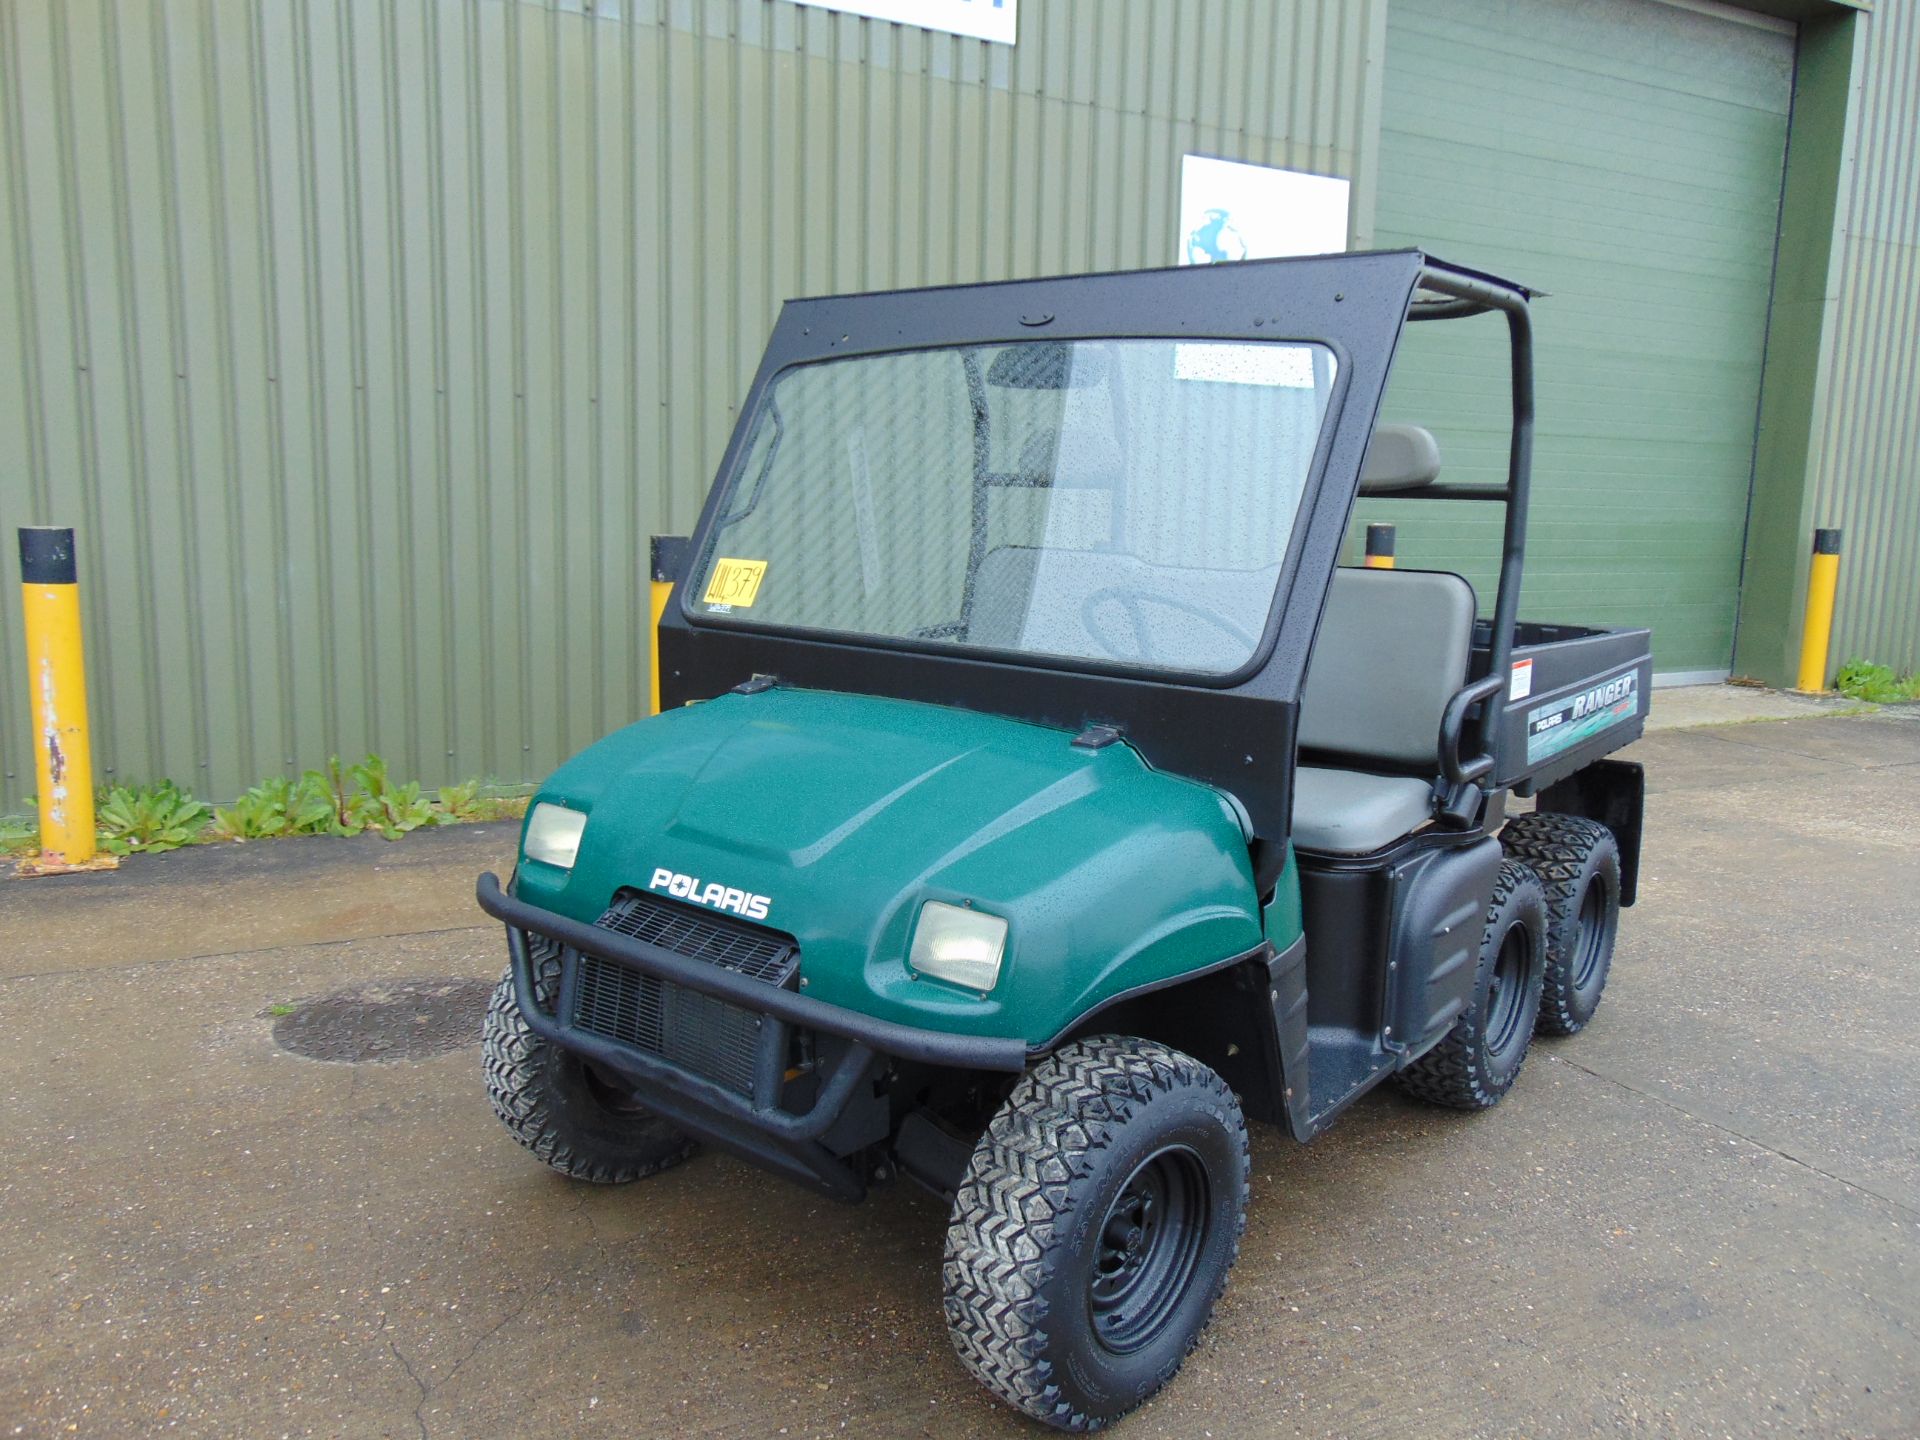 Polaris Ranger 6 x 6 Off-Road Utility Vehicle - Petrol Engine 555 hours Rec from Nat Grid